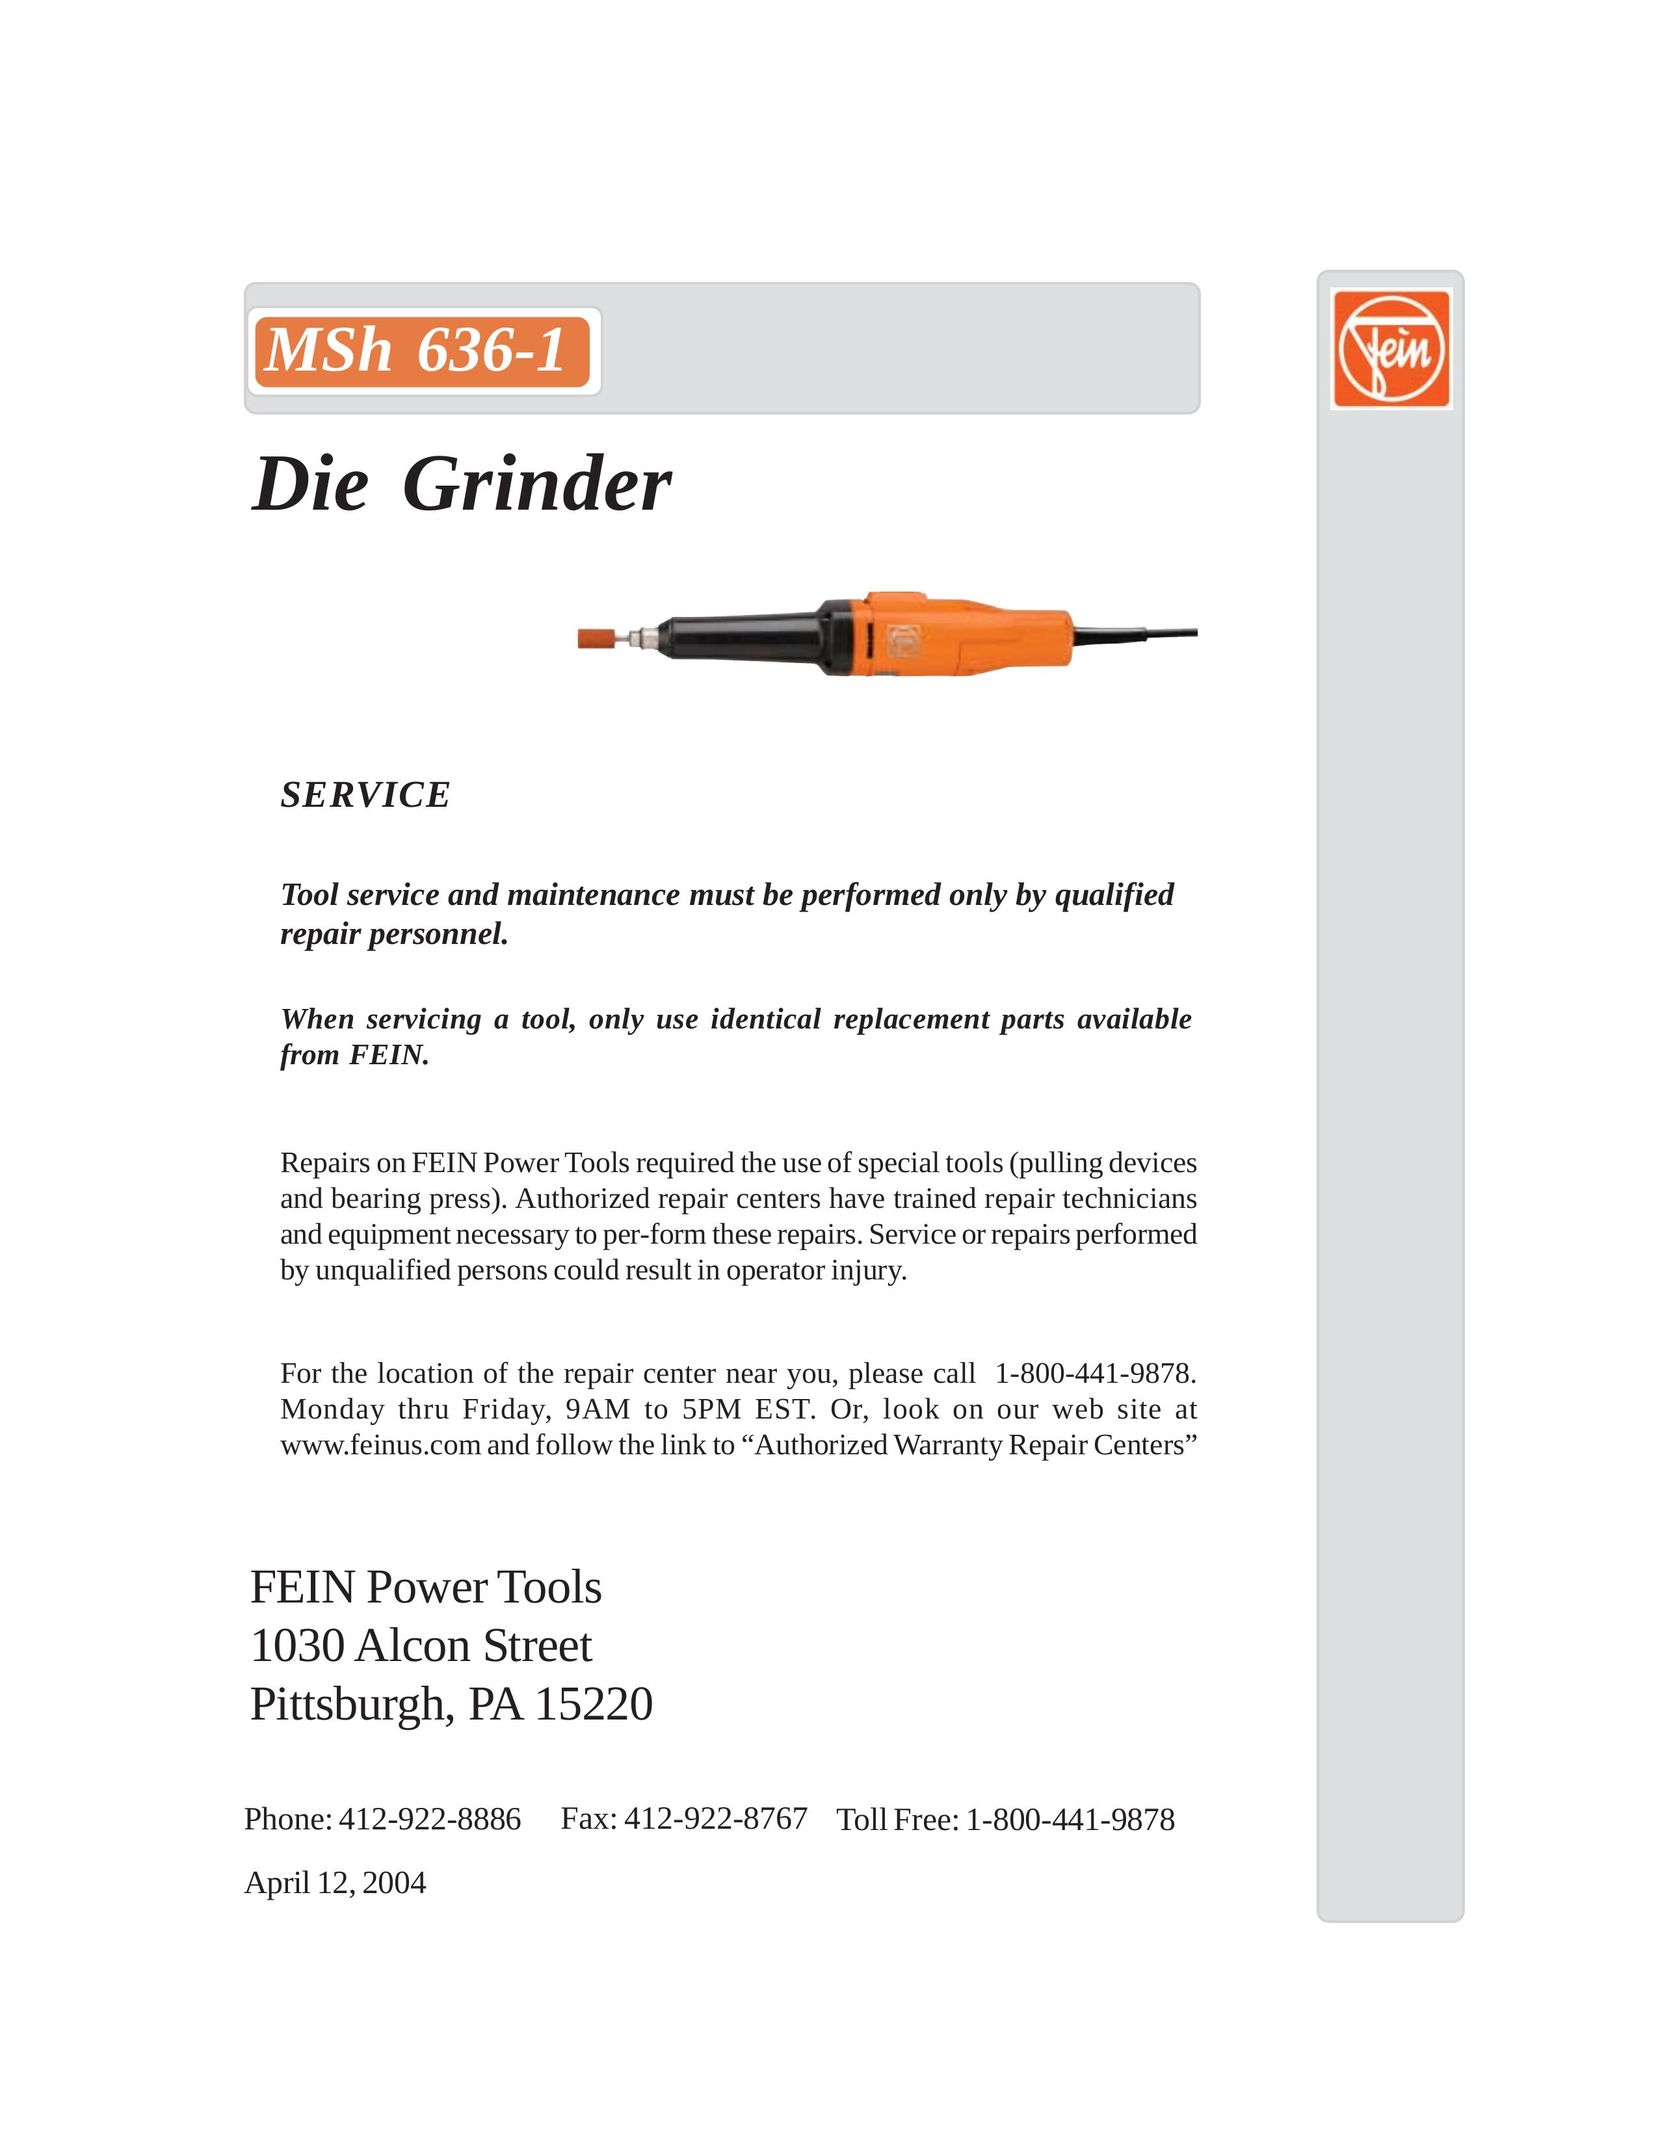 FEIN Power Tools MSh 636-1 Grinder User Manual